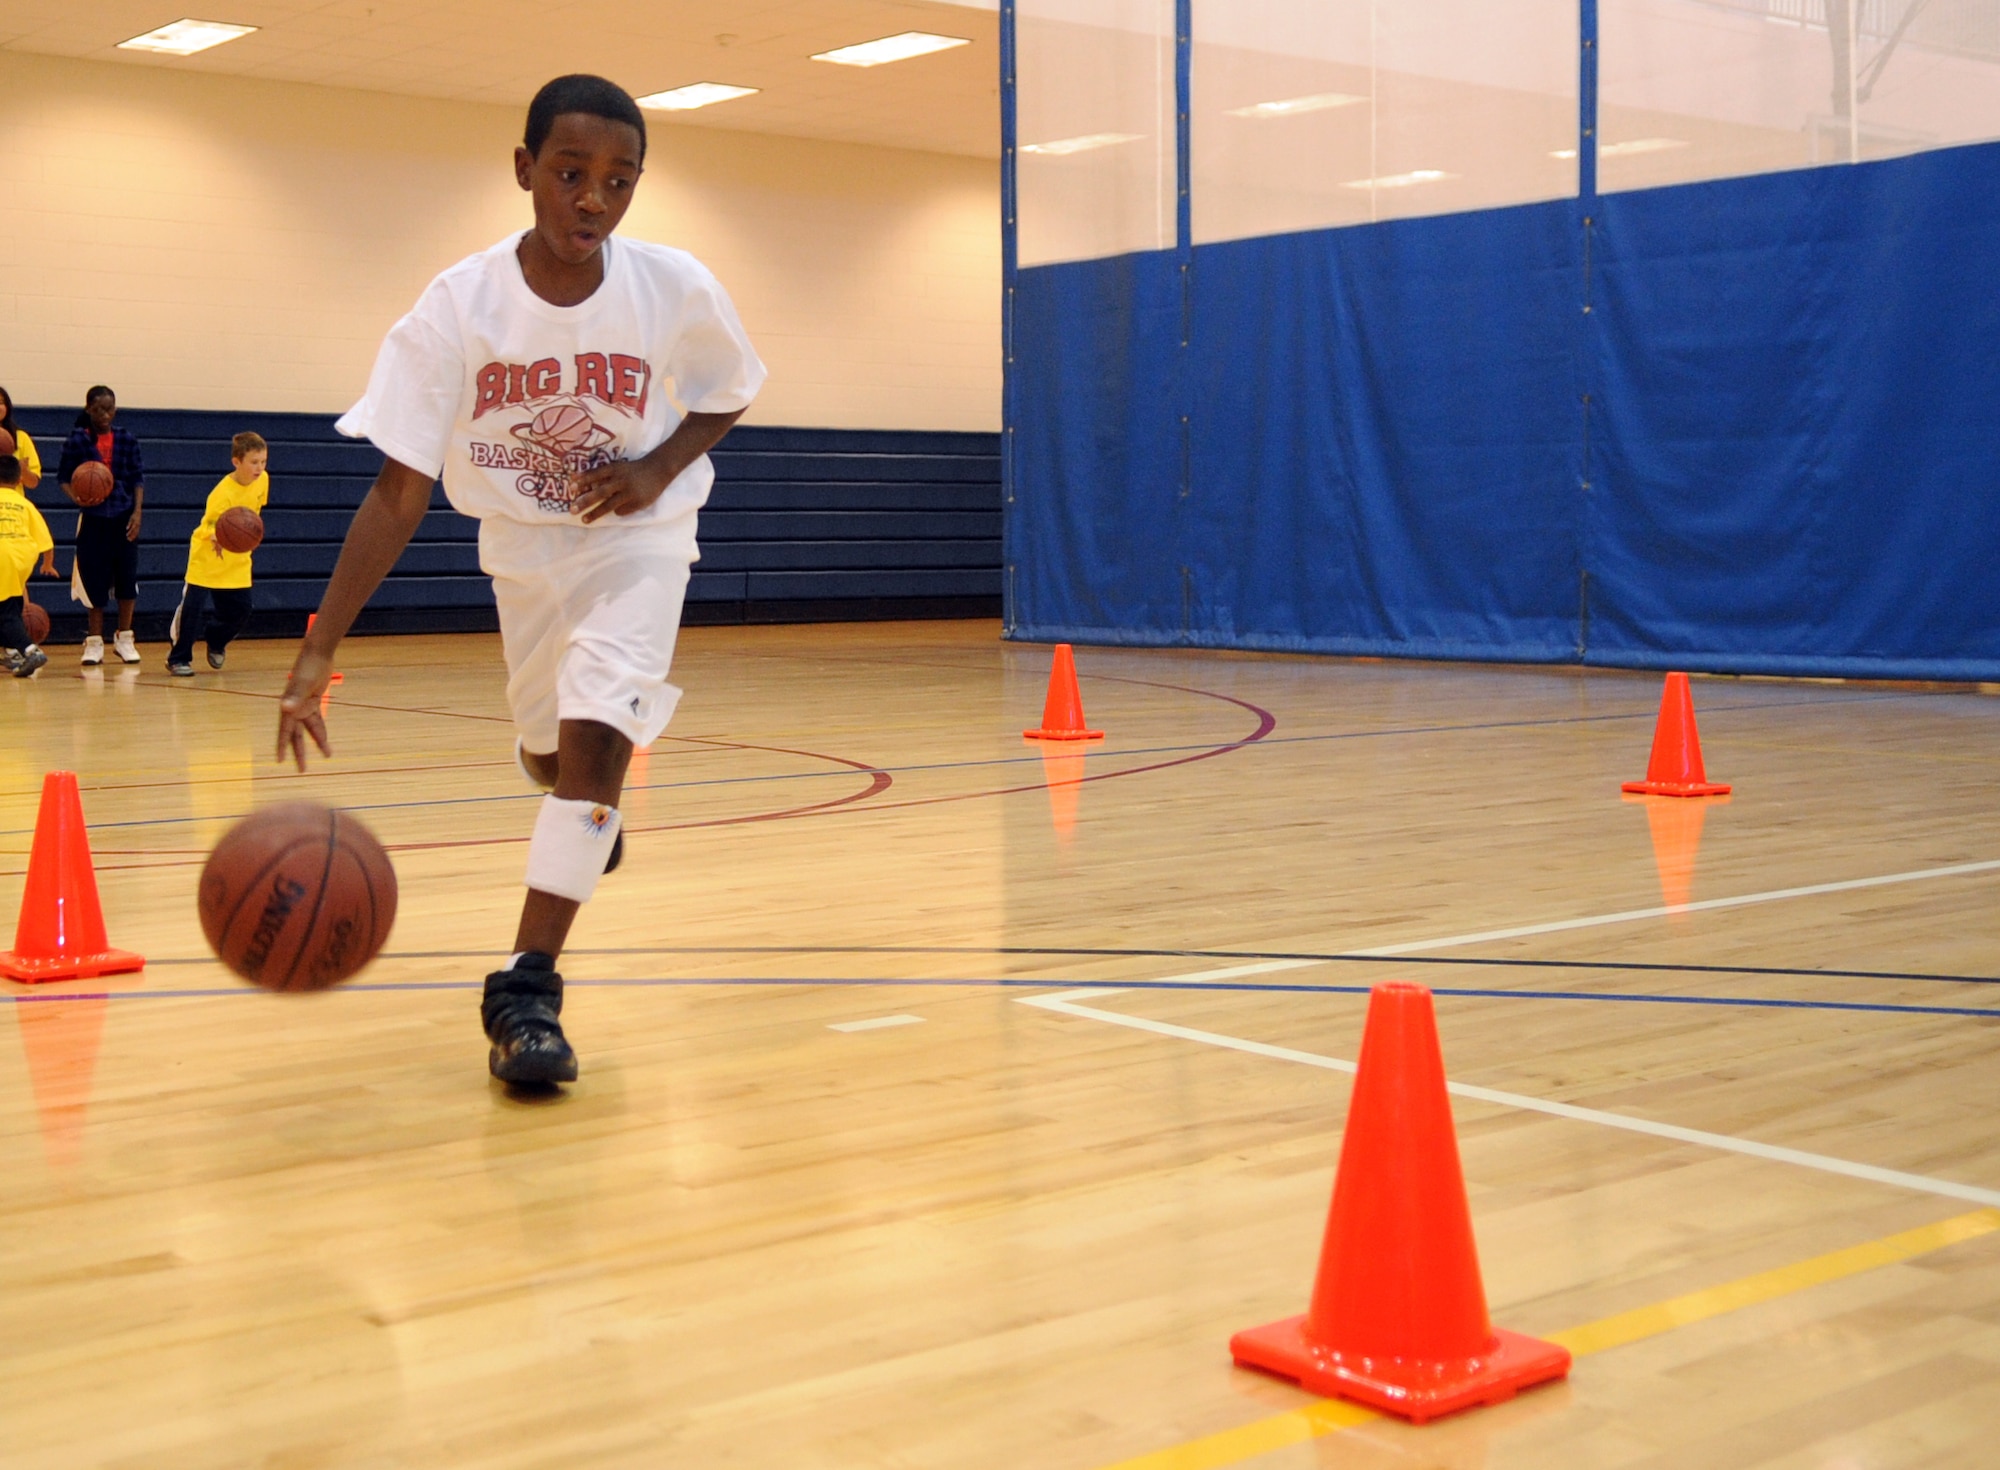 Tayveon Jordan dribbles through a drill during a basketball clinic hosted by the 460th Force Support Squadron at the fitness center Oct. 17. (U.S. Air Force photo by Senior Airman John Easterling)